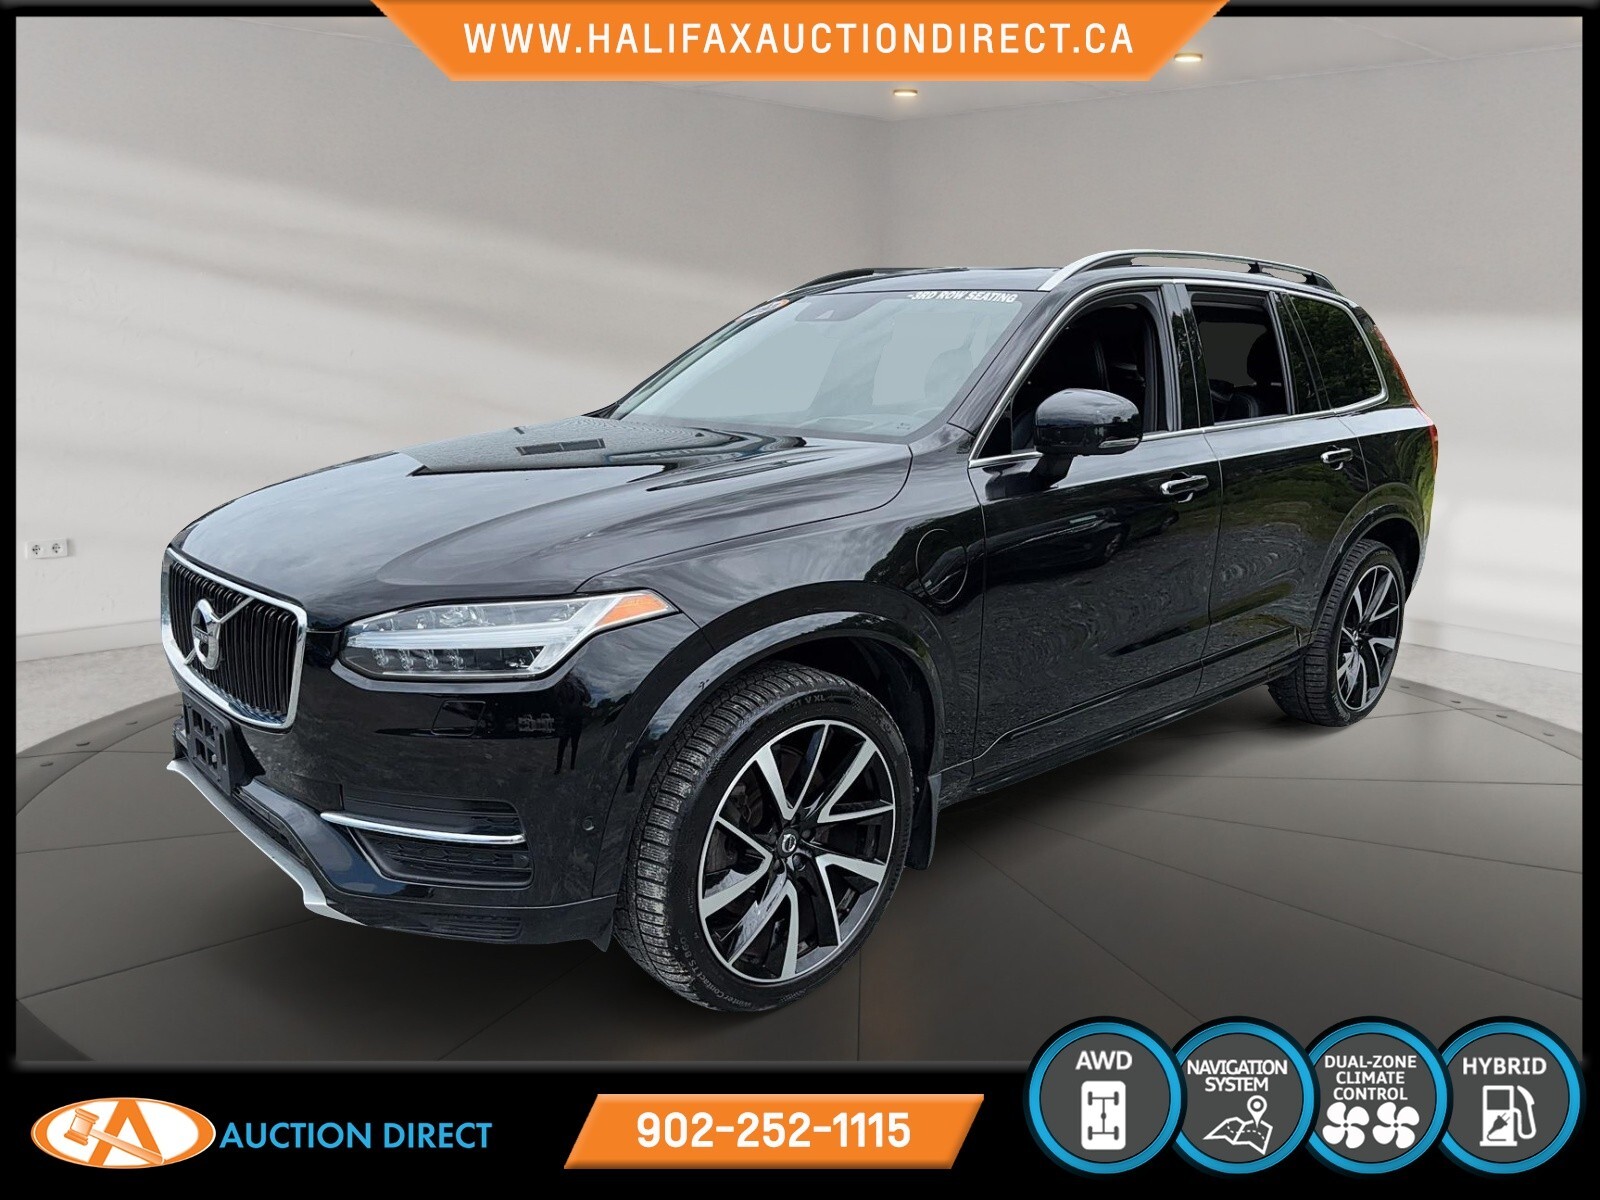 2018 Volvo XC90 Hybrid T8 Momentum 3rd. ROW SEATING! LEATHER INTERIOR, NA